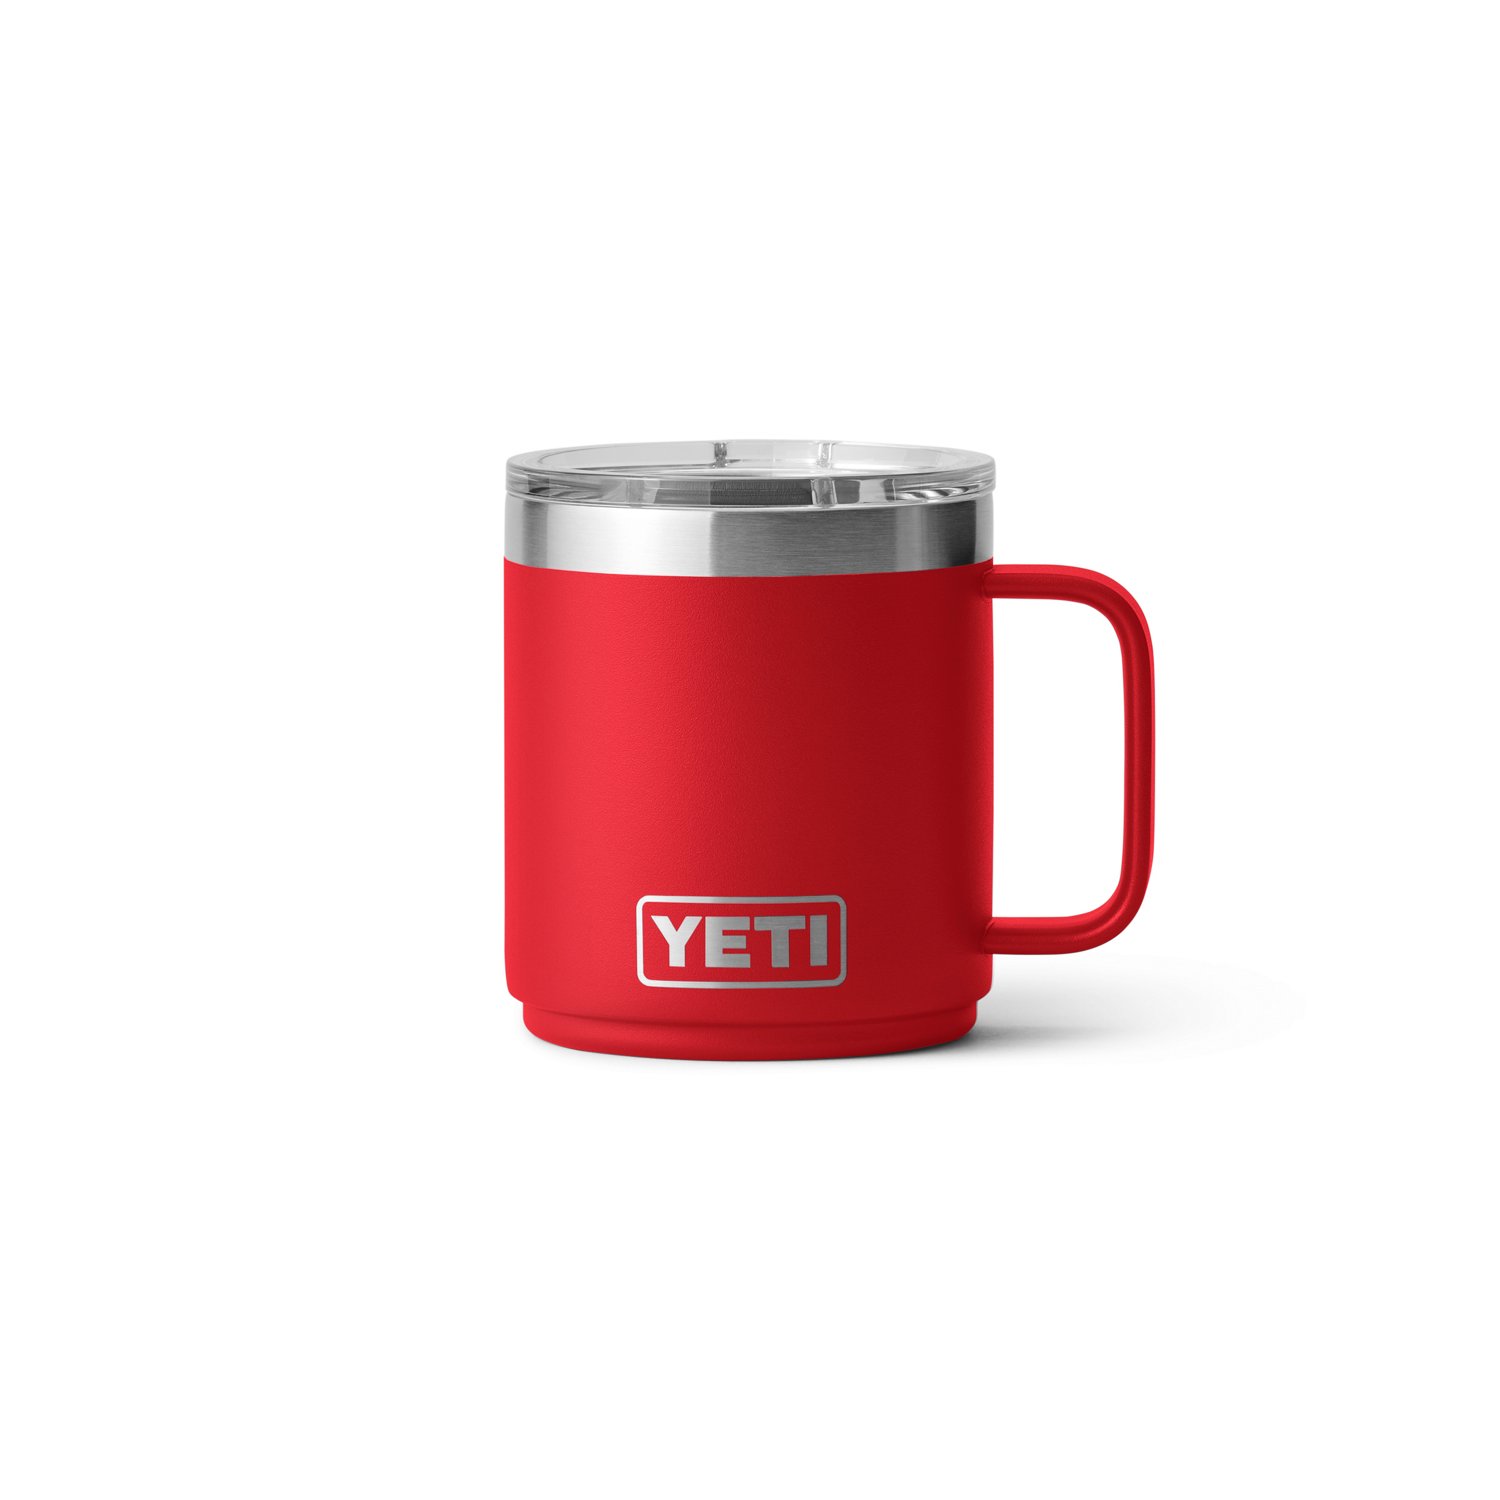 https://academy.scene7.com/is/image/academy//drinkware/yeti-rambler-10-oz-stackable-mug-with-magslider-lid-21071501385-red/1bb1df67a4bc4ef79b691600a084e0f2